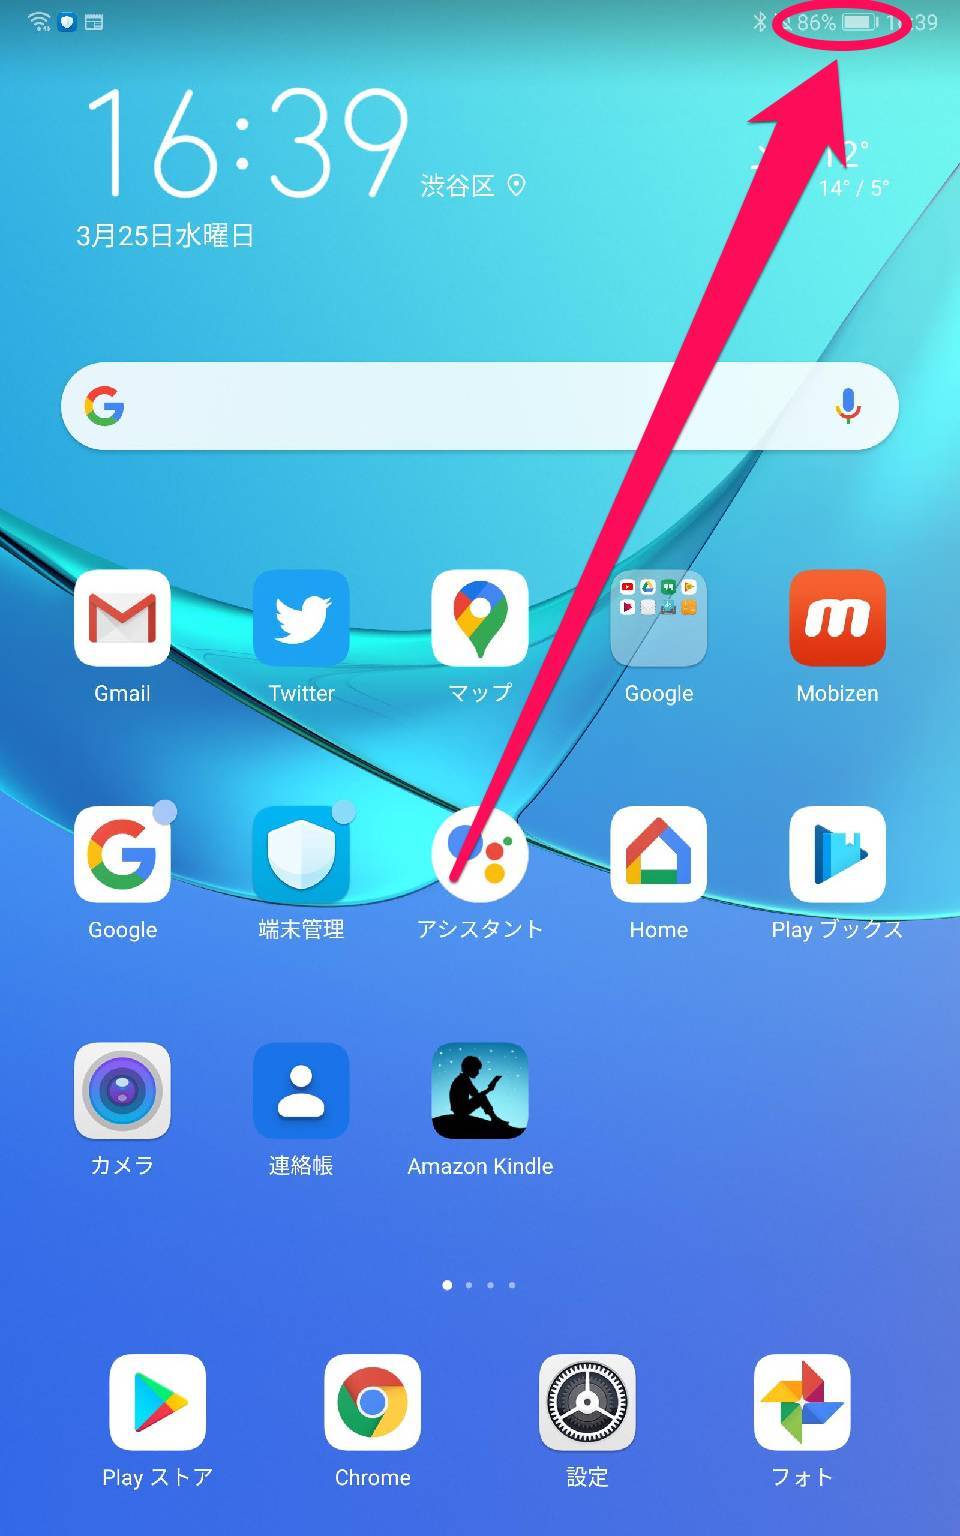 Androidのバッテリー残量を パーセント 表示にする方法 Appliv Topics